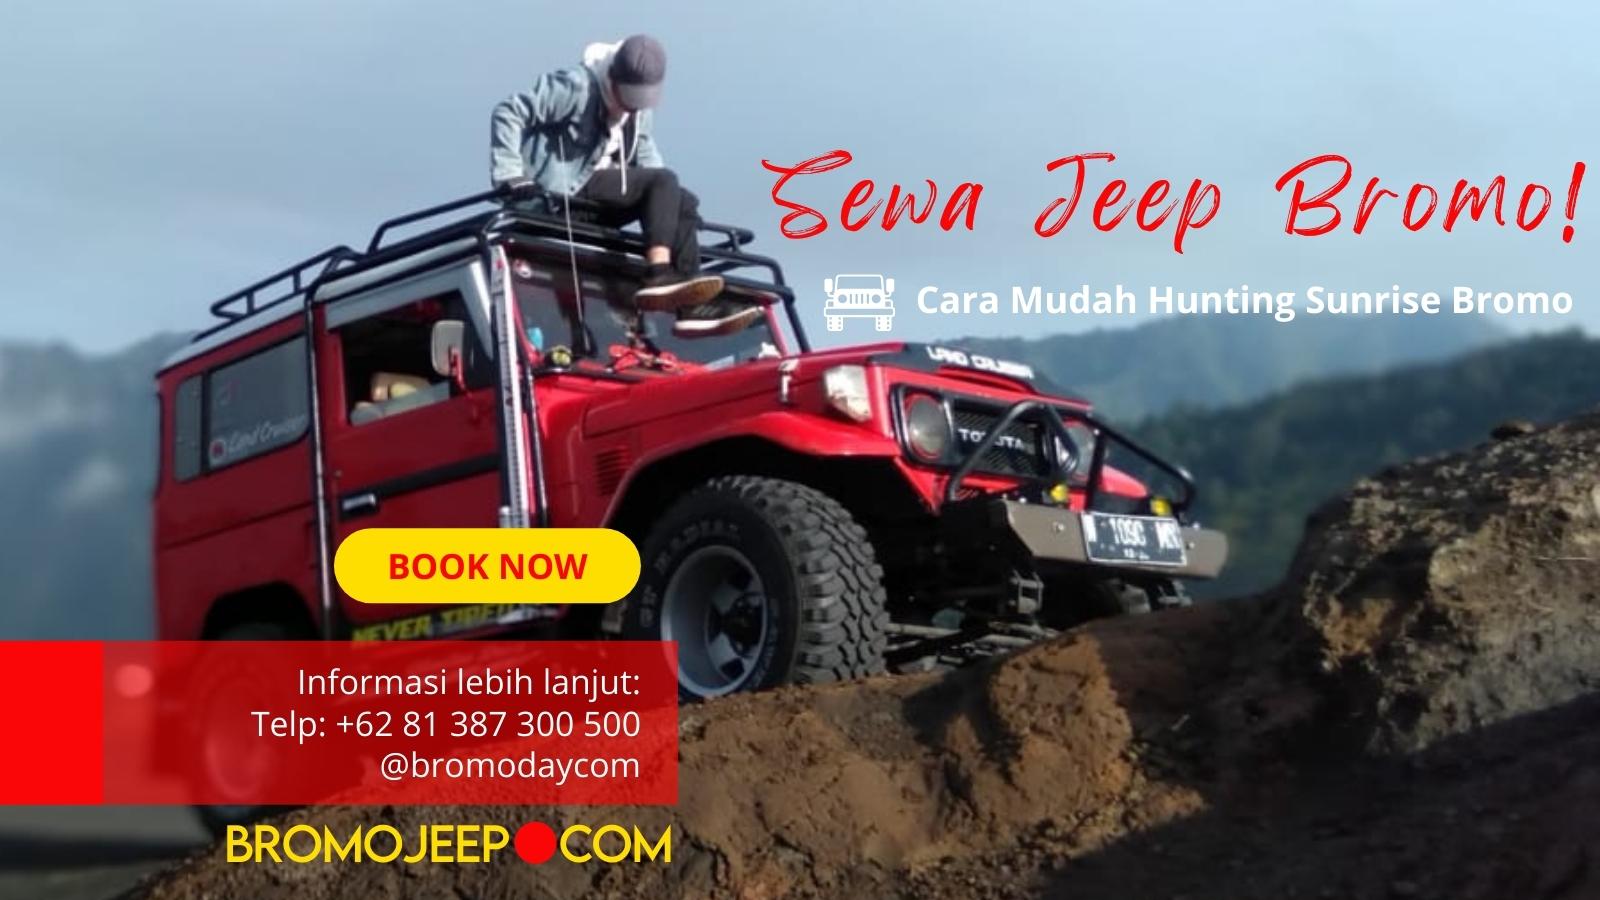 Sekilas Tentang Bromo Jeep by Bromo Day